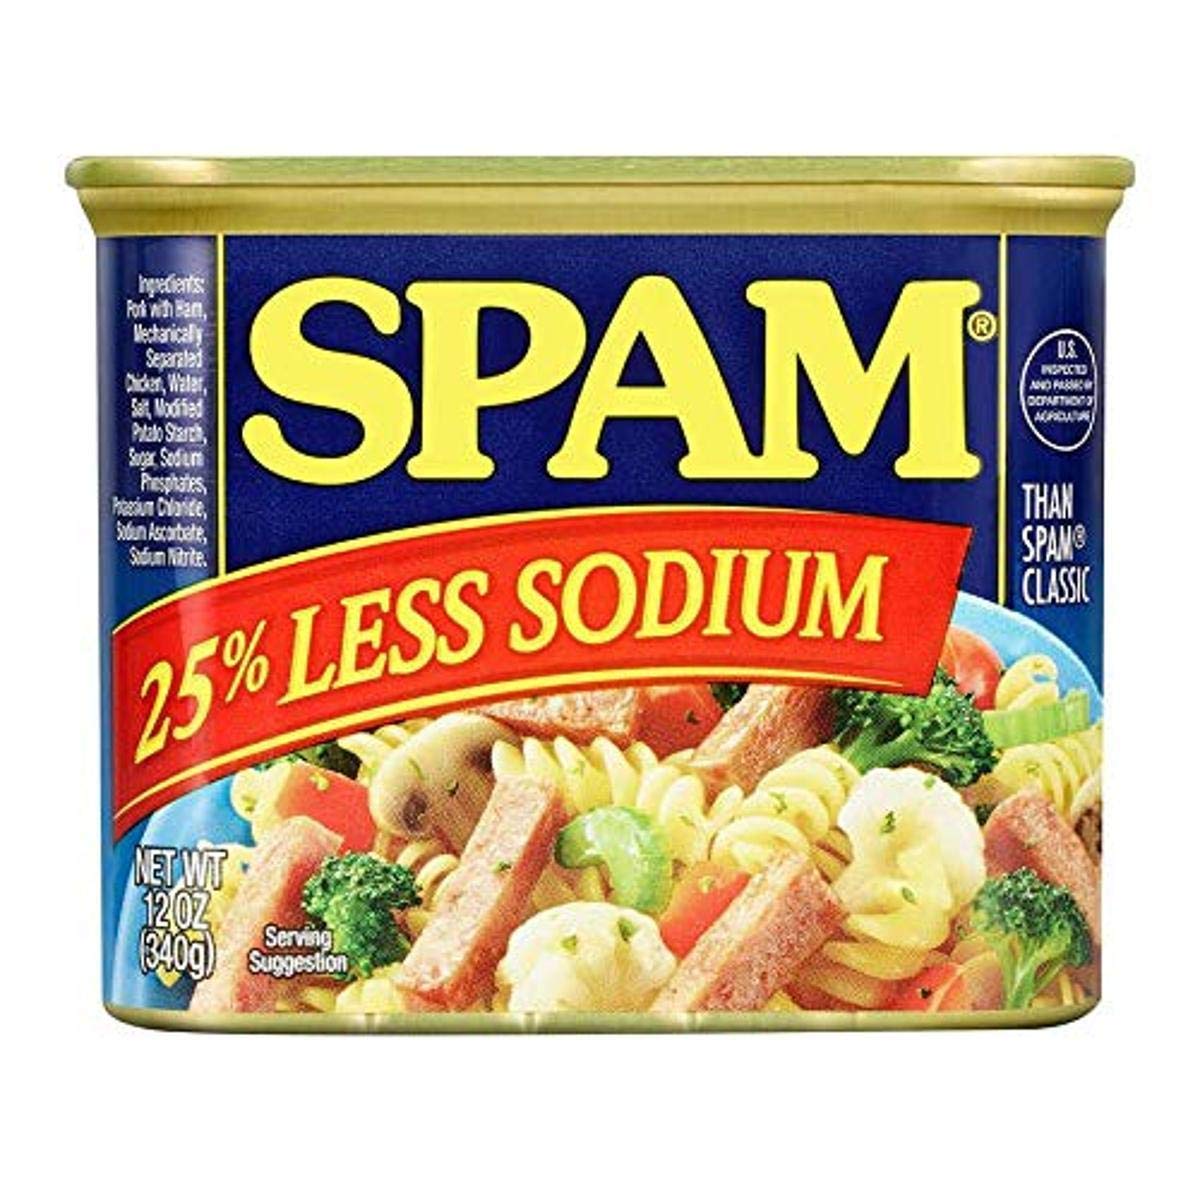 SPAM Less Sodium, 12 Oz (Pack Of 12) Less Sodium 12 Ounce (Pack of 12), Now Only $32.97